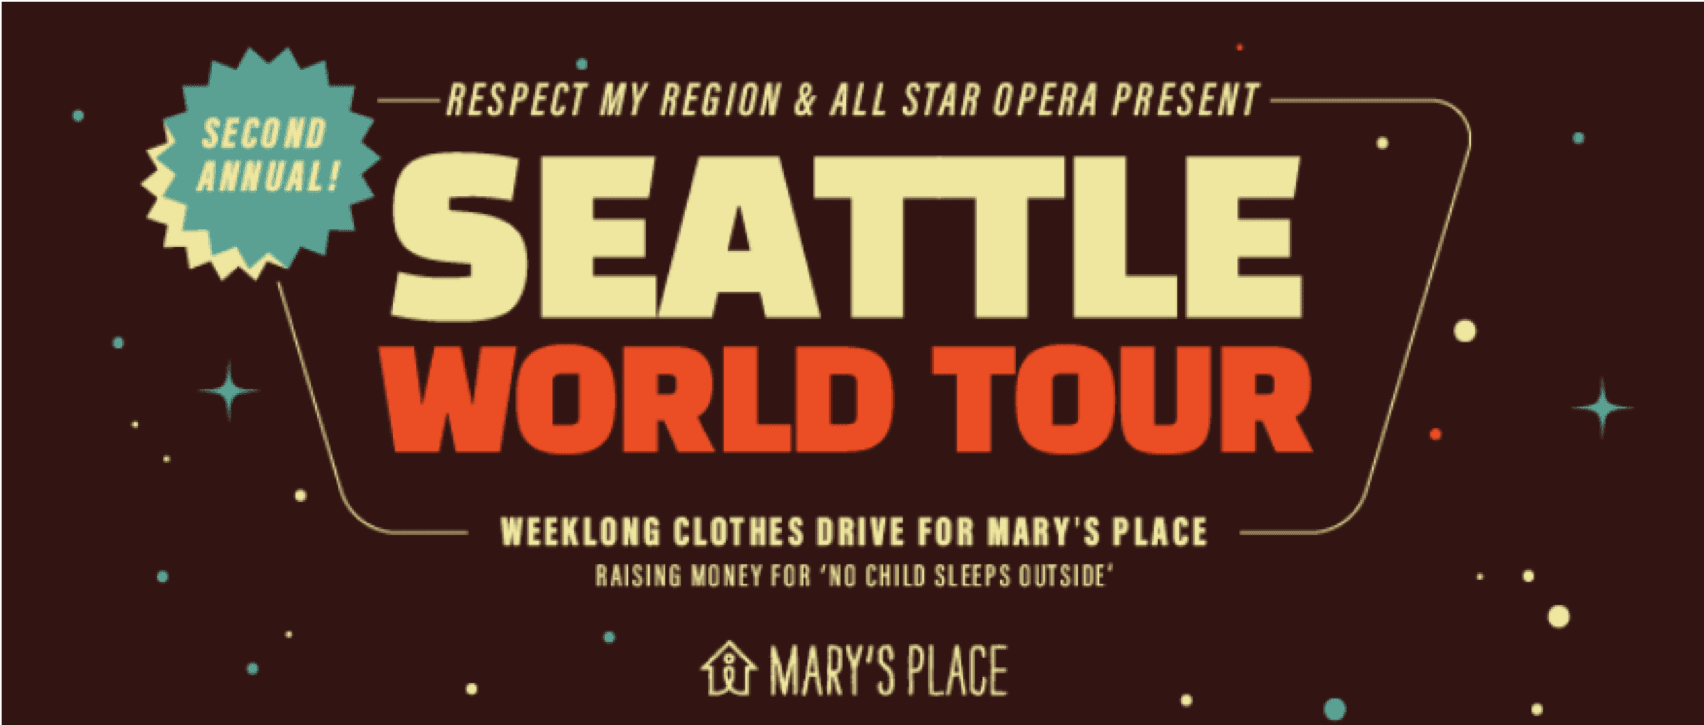 Second Annual Seattle World Tour Coming January 2019